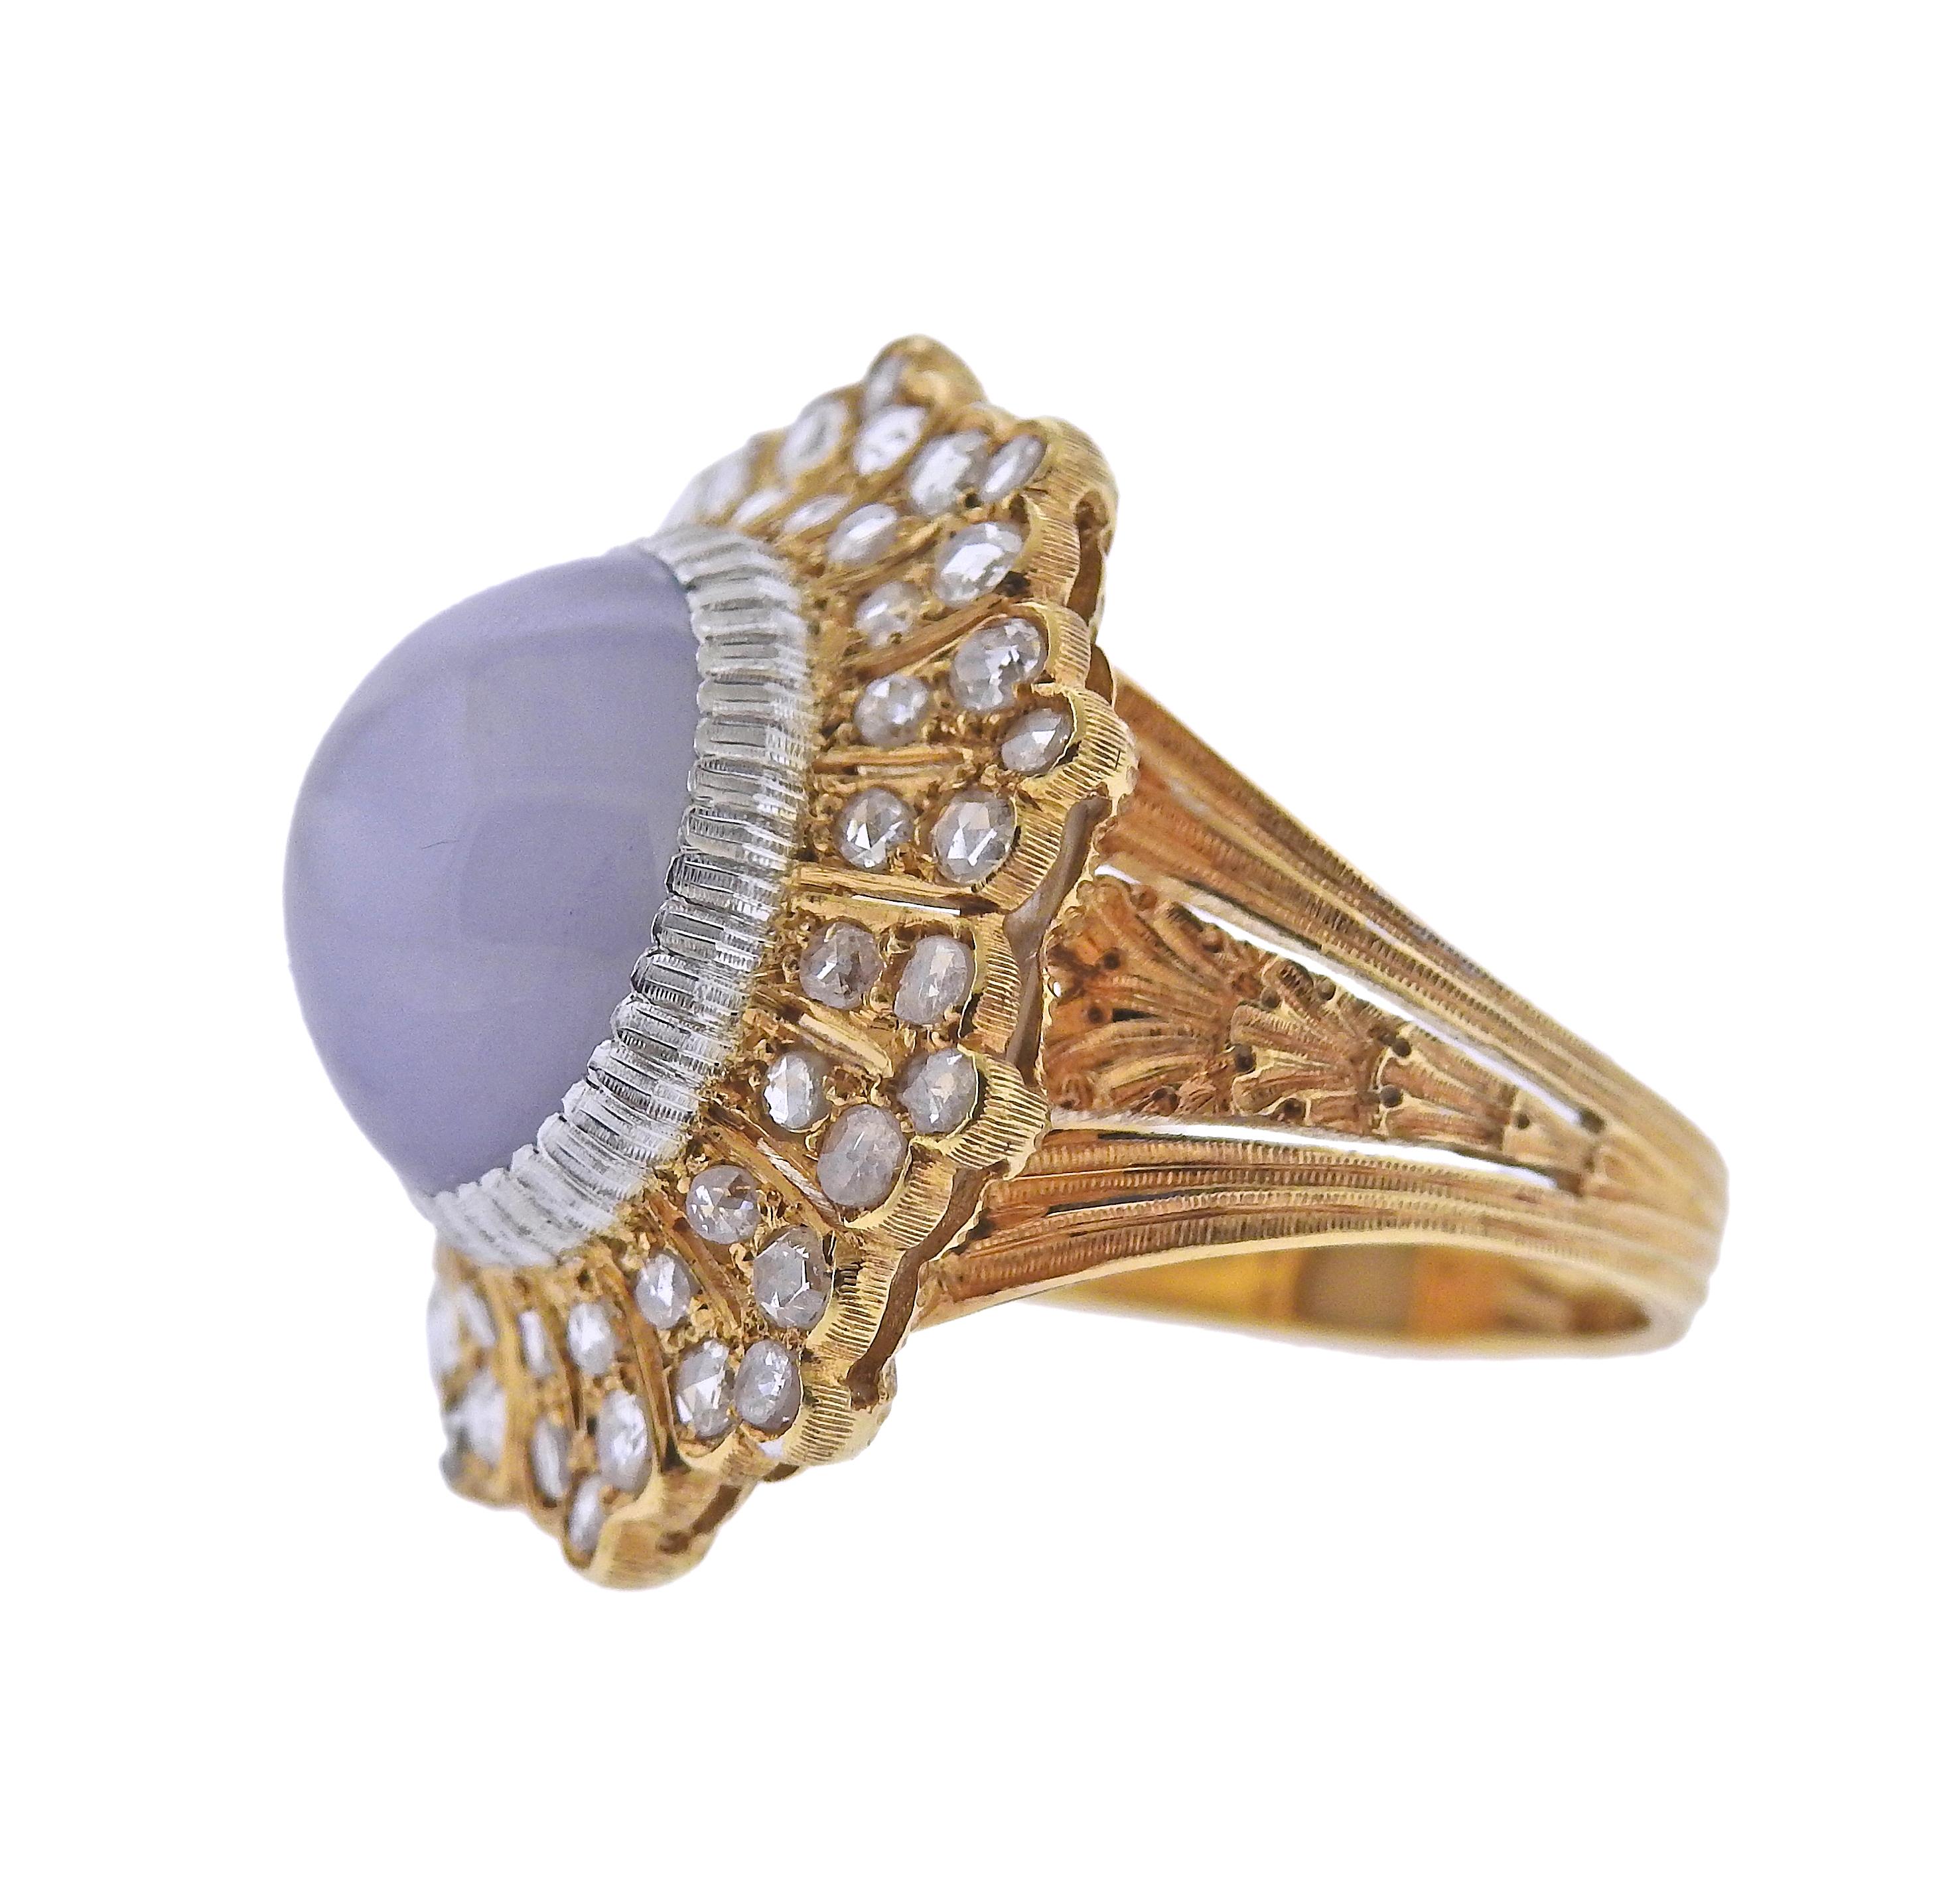 Exquisite 18k gold ring by Buccellati, with center 14.97ct star sapphire cabochon (stone measures 12.6 x 11.1 x 9.2mm) and 0.84ctw in rose cut diamonds.   Ring size - 6.5, ring top - 24mm x 22mm. Marked: Buccellati, Italy, 18k, X3065. Weight - 13.7